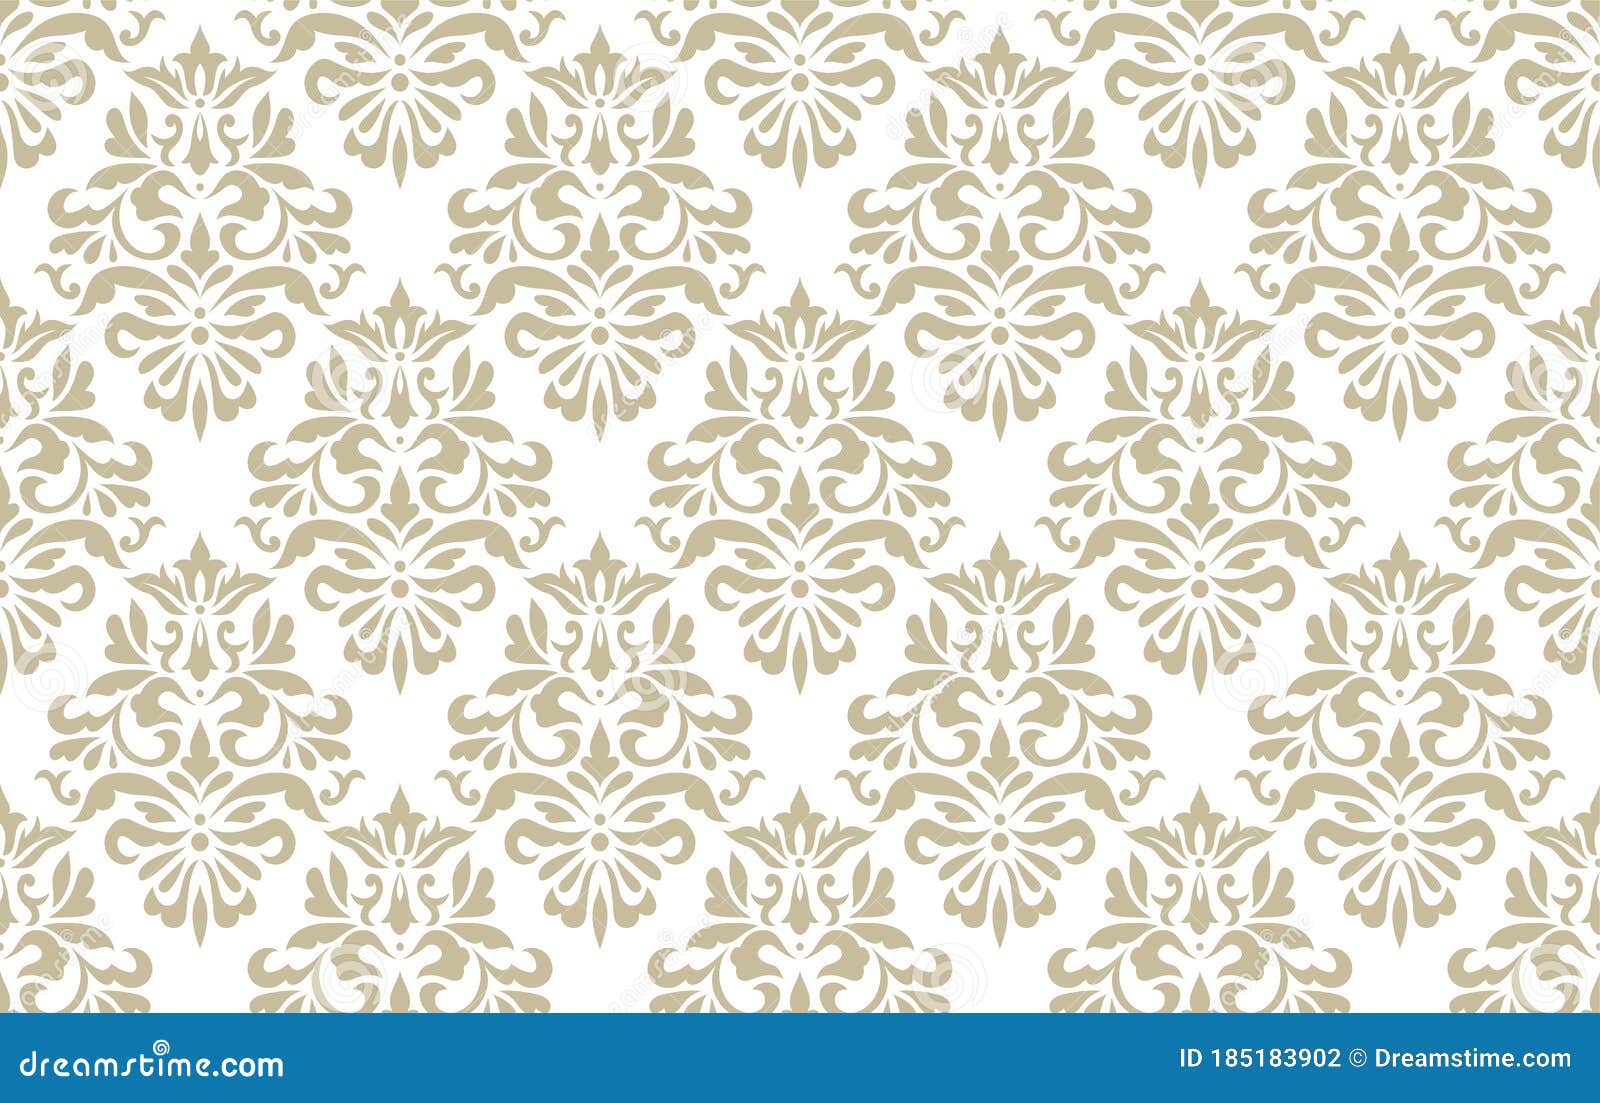 Vector Vintage Seamless Floral Damask Pattern for Wedding Invitation or  Vintage Abstract Background. Stock Vector - Illustration of organic, decor:  185183902